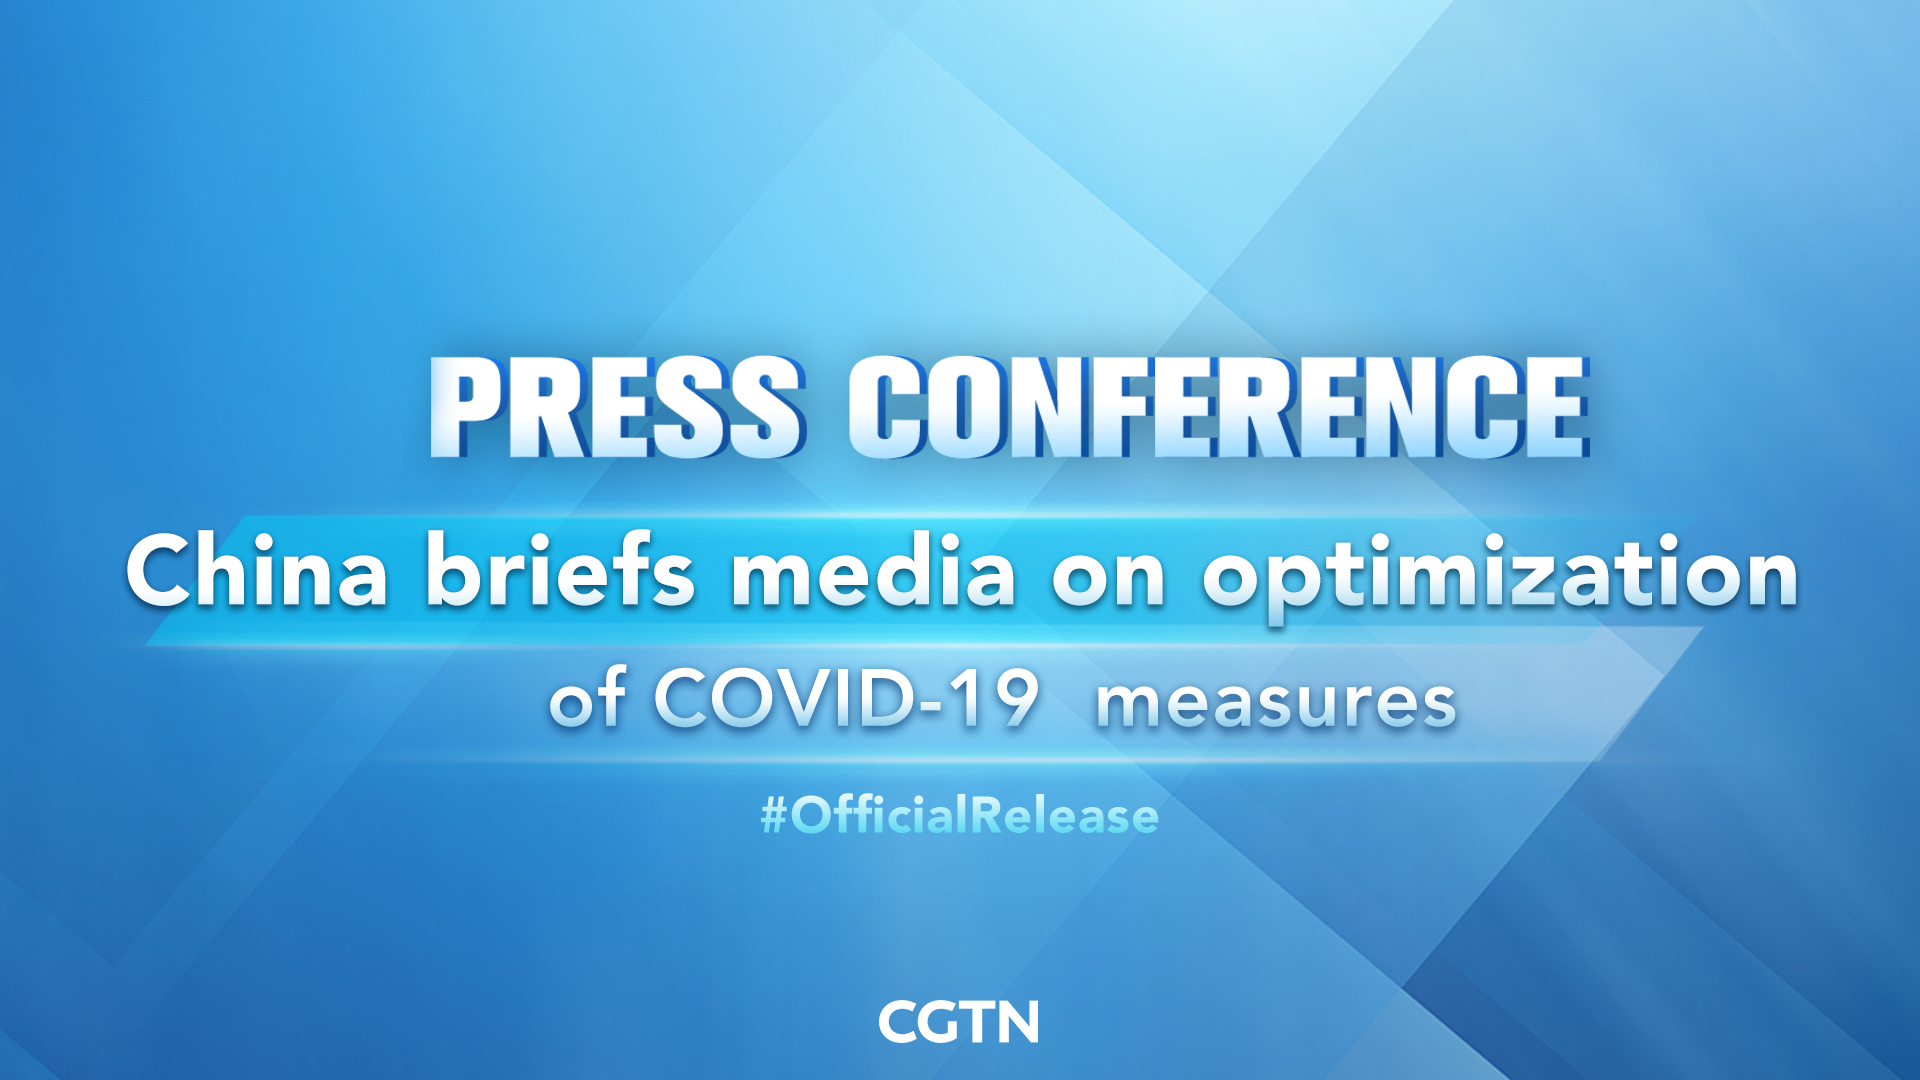 Live: China briefs media on optimization of COVID-19 measures